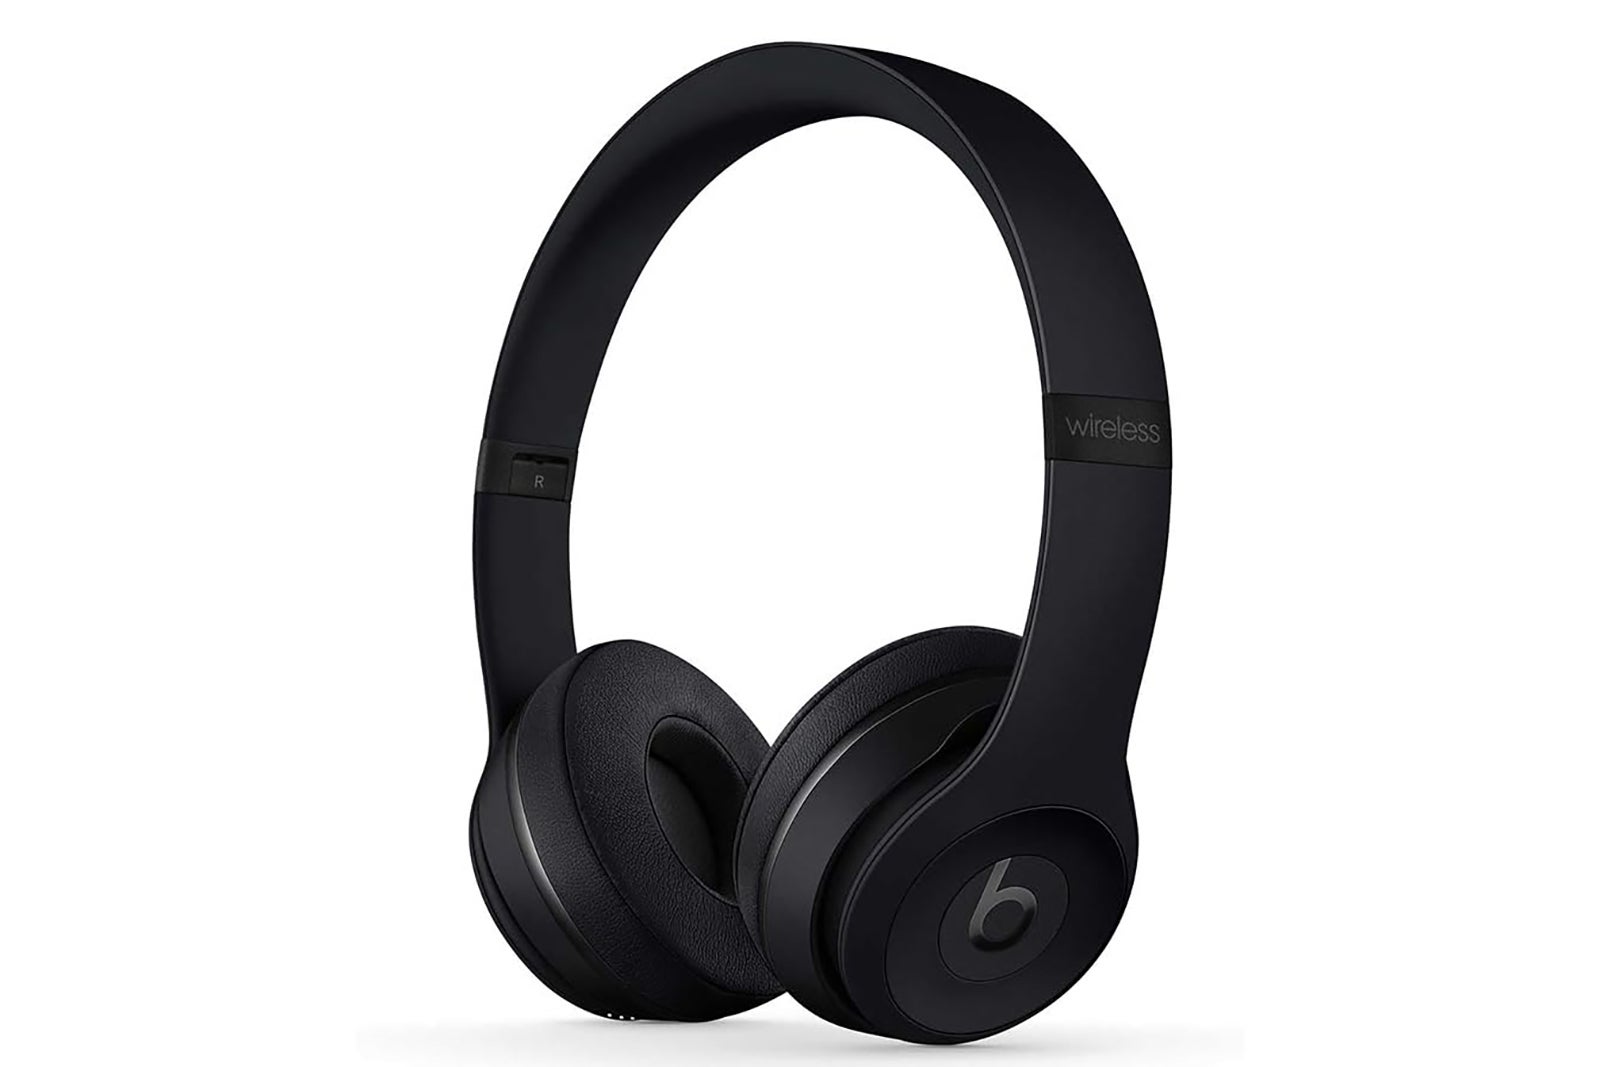 Beats Solo3 Wireless Noise Cancelling Over-Ear Headphones